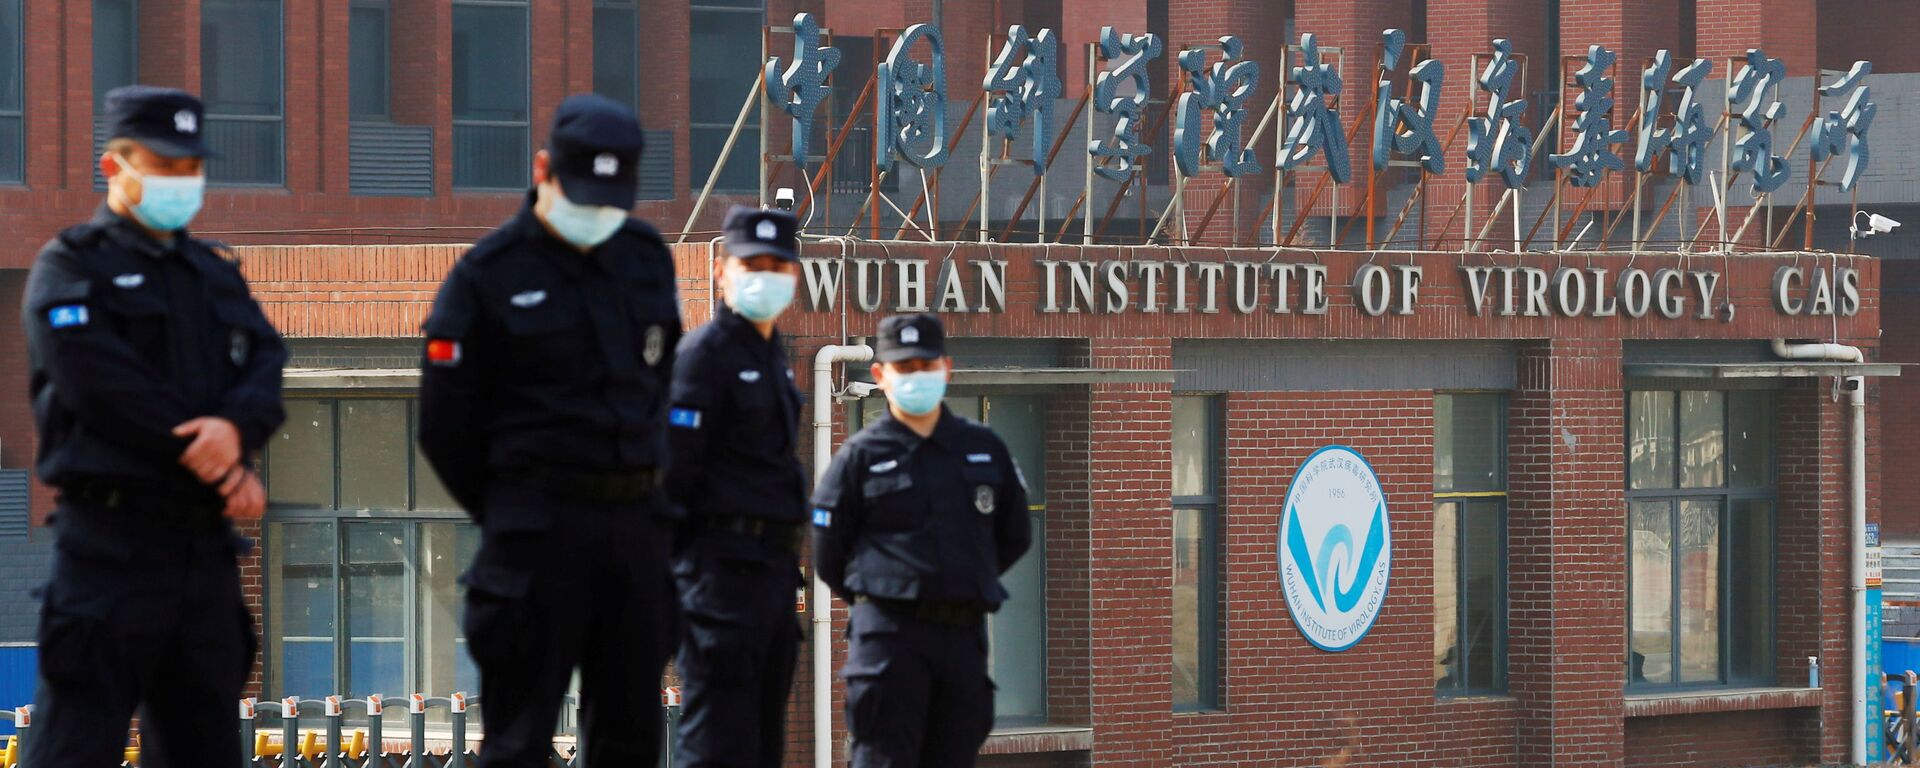 Security personnel keep watch outside Wuhan Institute of Virology during the visit by the World Health Organization (WHO) team tasked with investigating the origins of the coronavirus disease (COVID-19), in Wuhan, Hubei province, China February 3, 2021 - Sputnik International, 1920, 06.06.2021